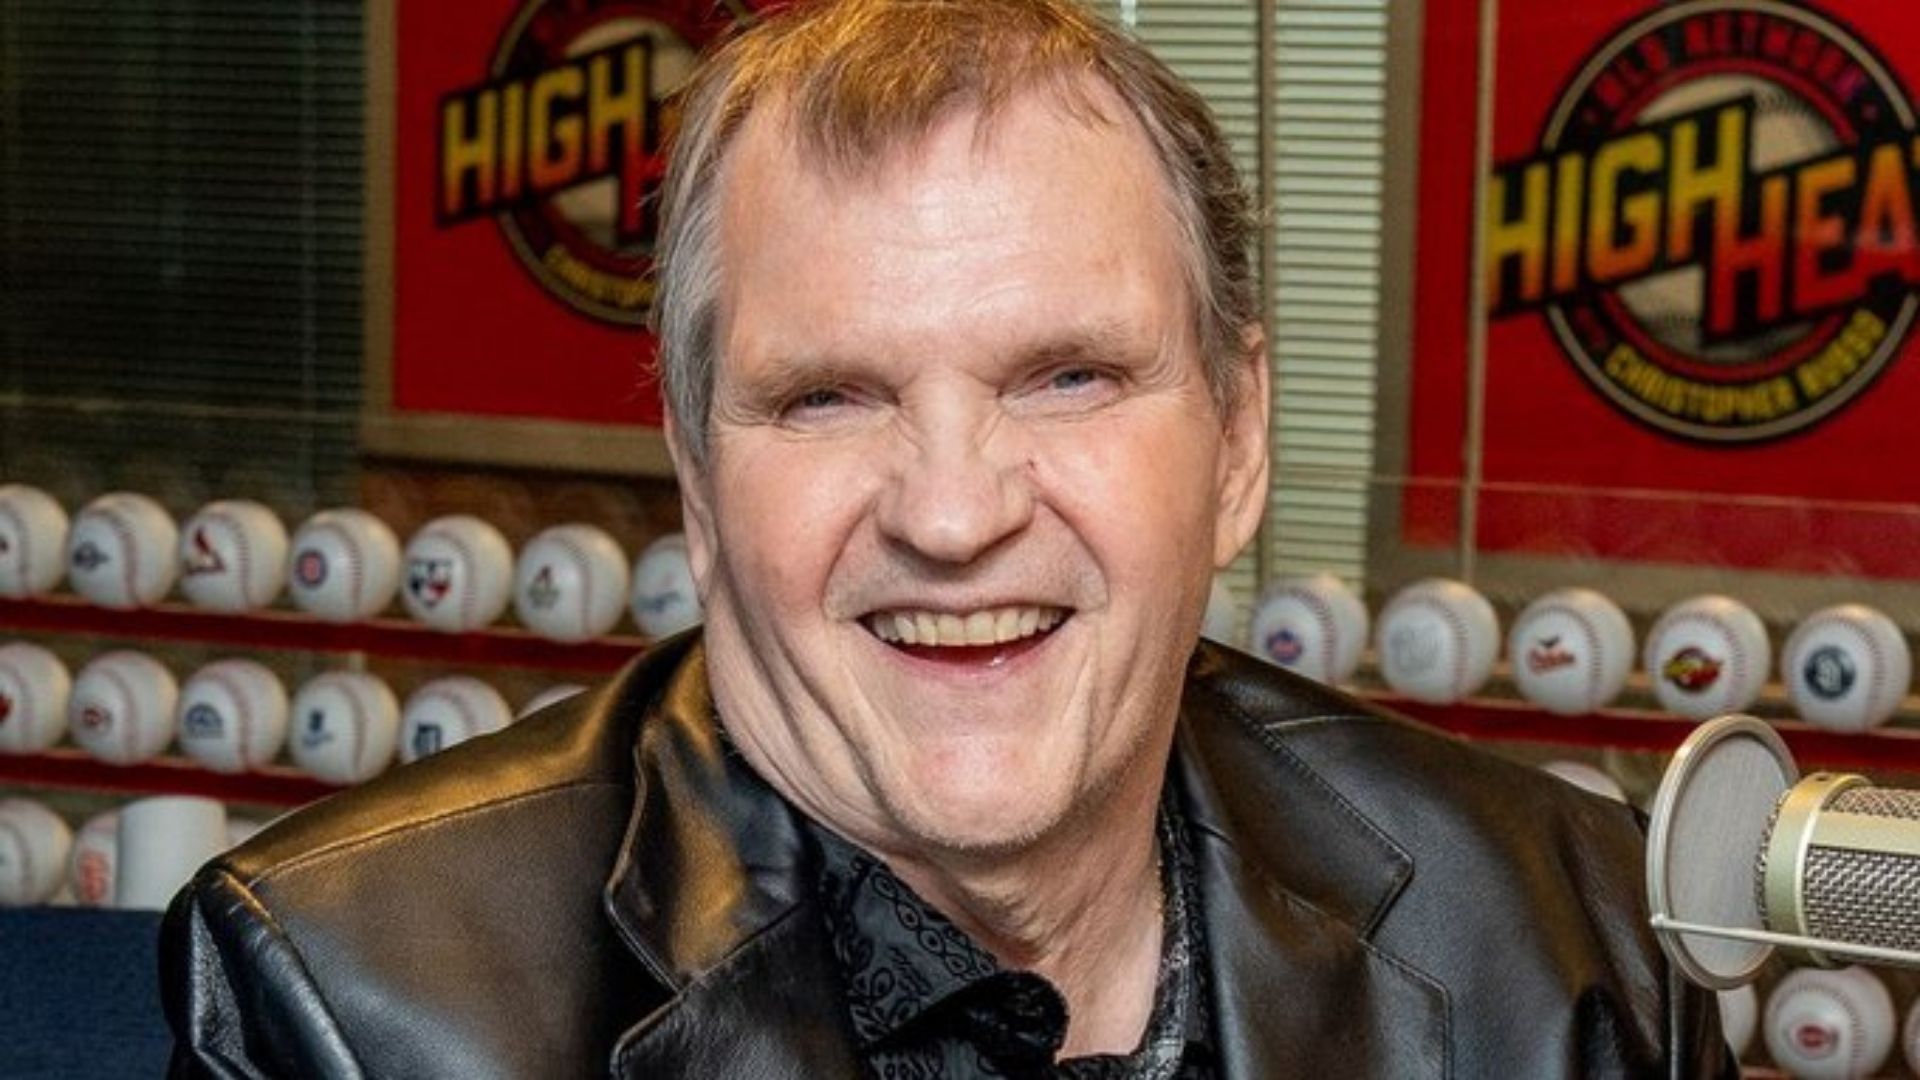 Legendary singer and actor Meat Loaf dies aged 74